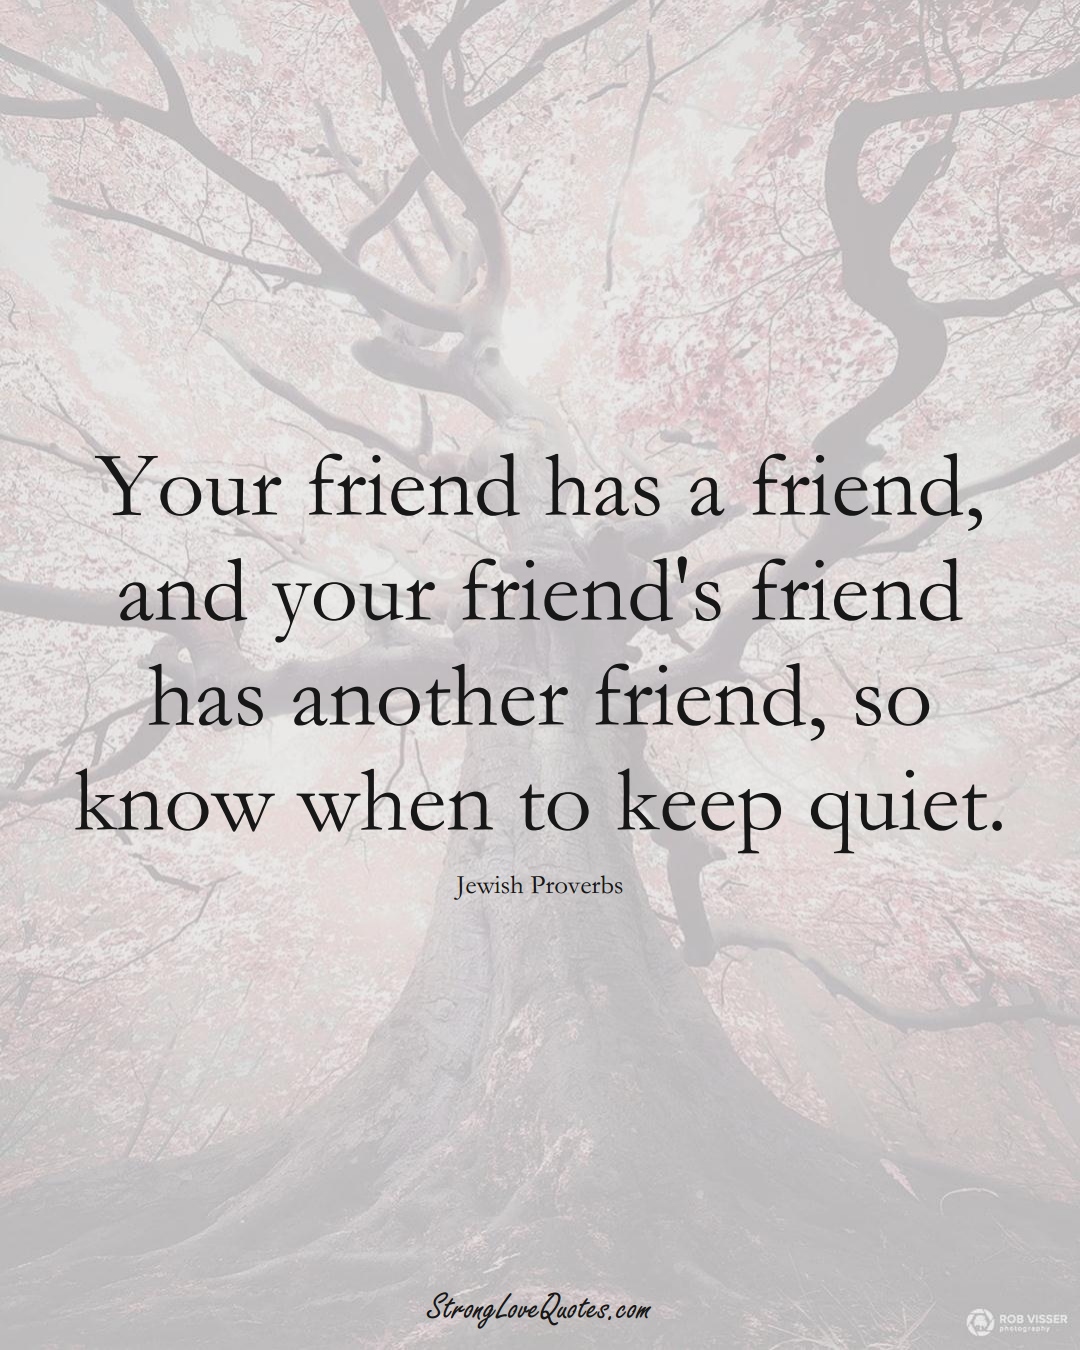 Your friend has a friend, and your friend's friend has another friend, so know when to keep quiet. (Jewish Sayings);  #aVarietyofCulturesSayings